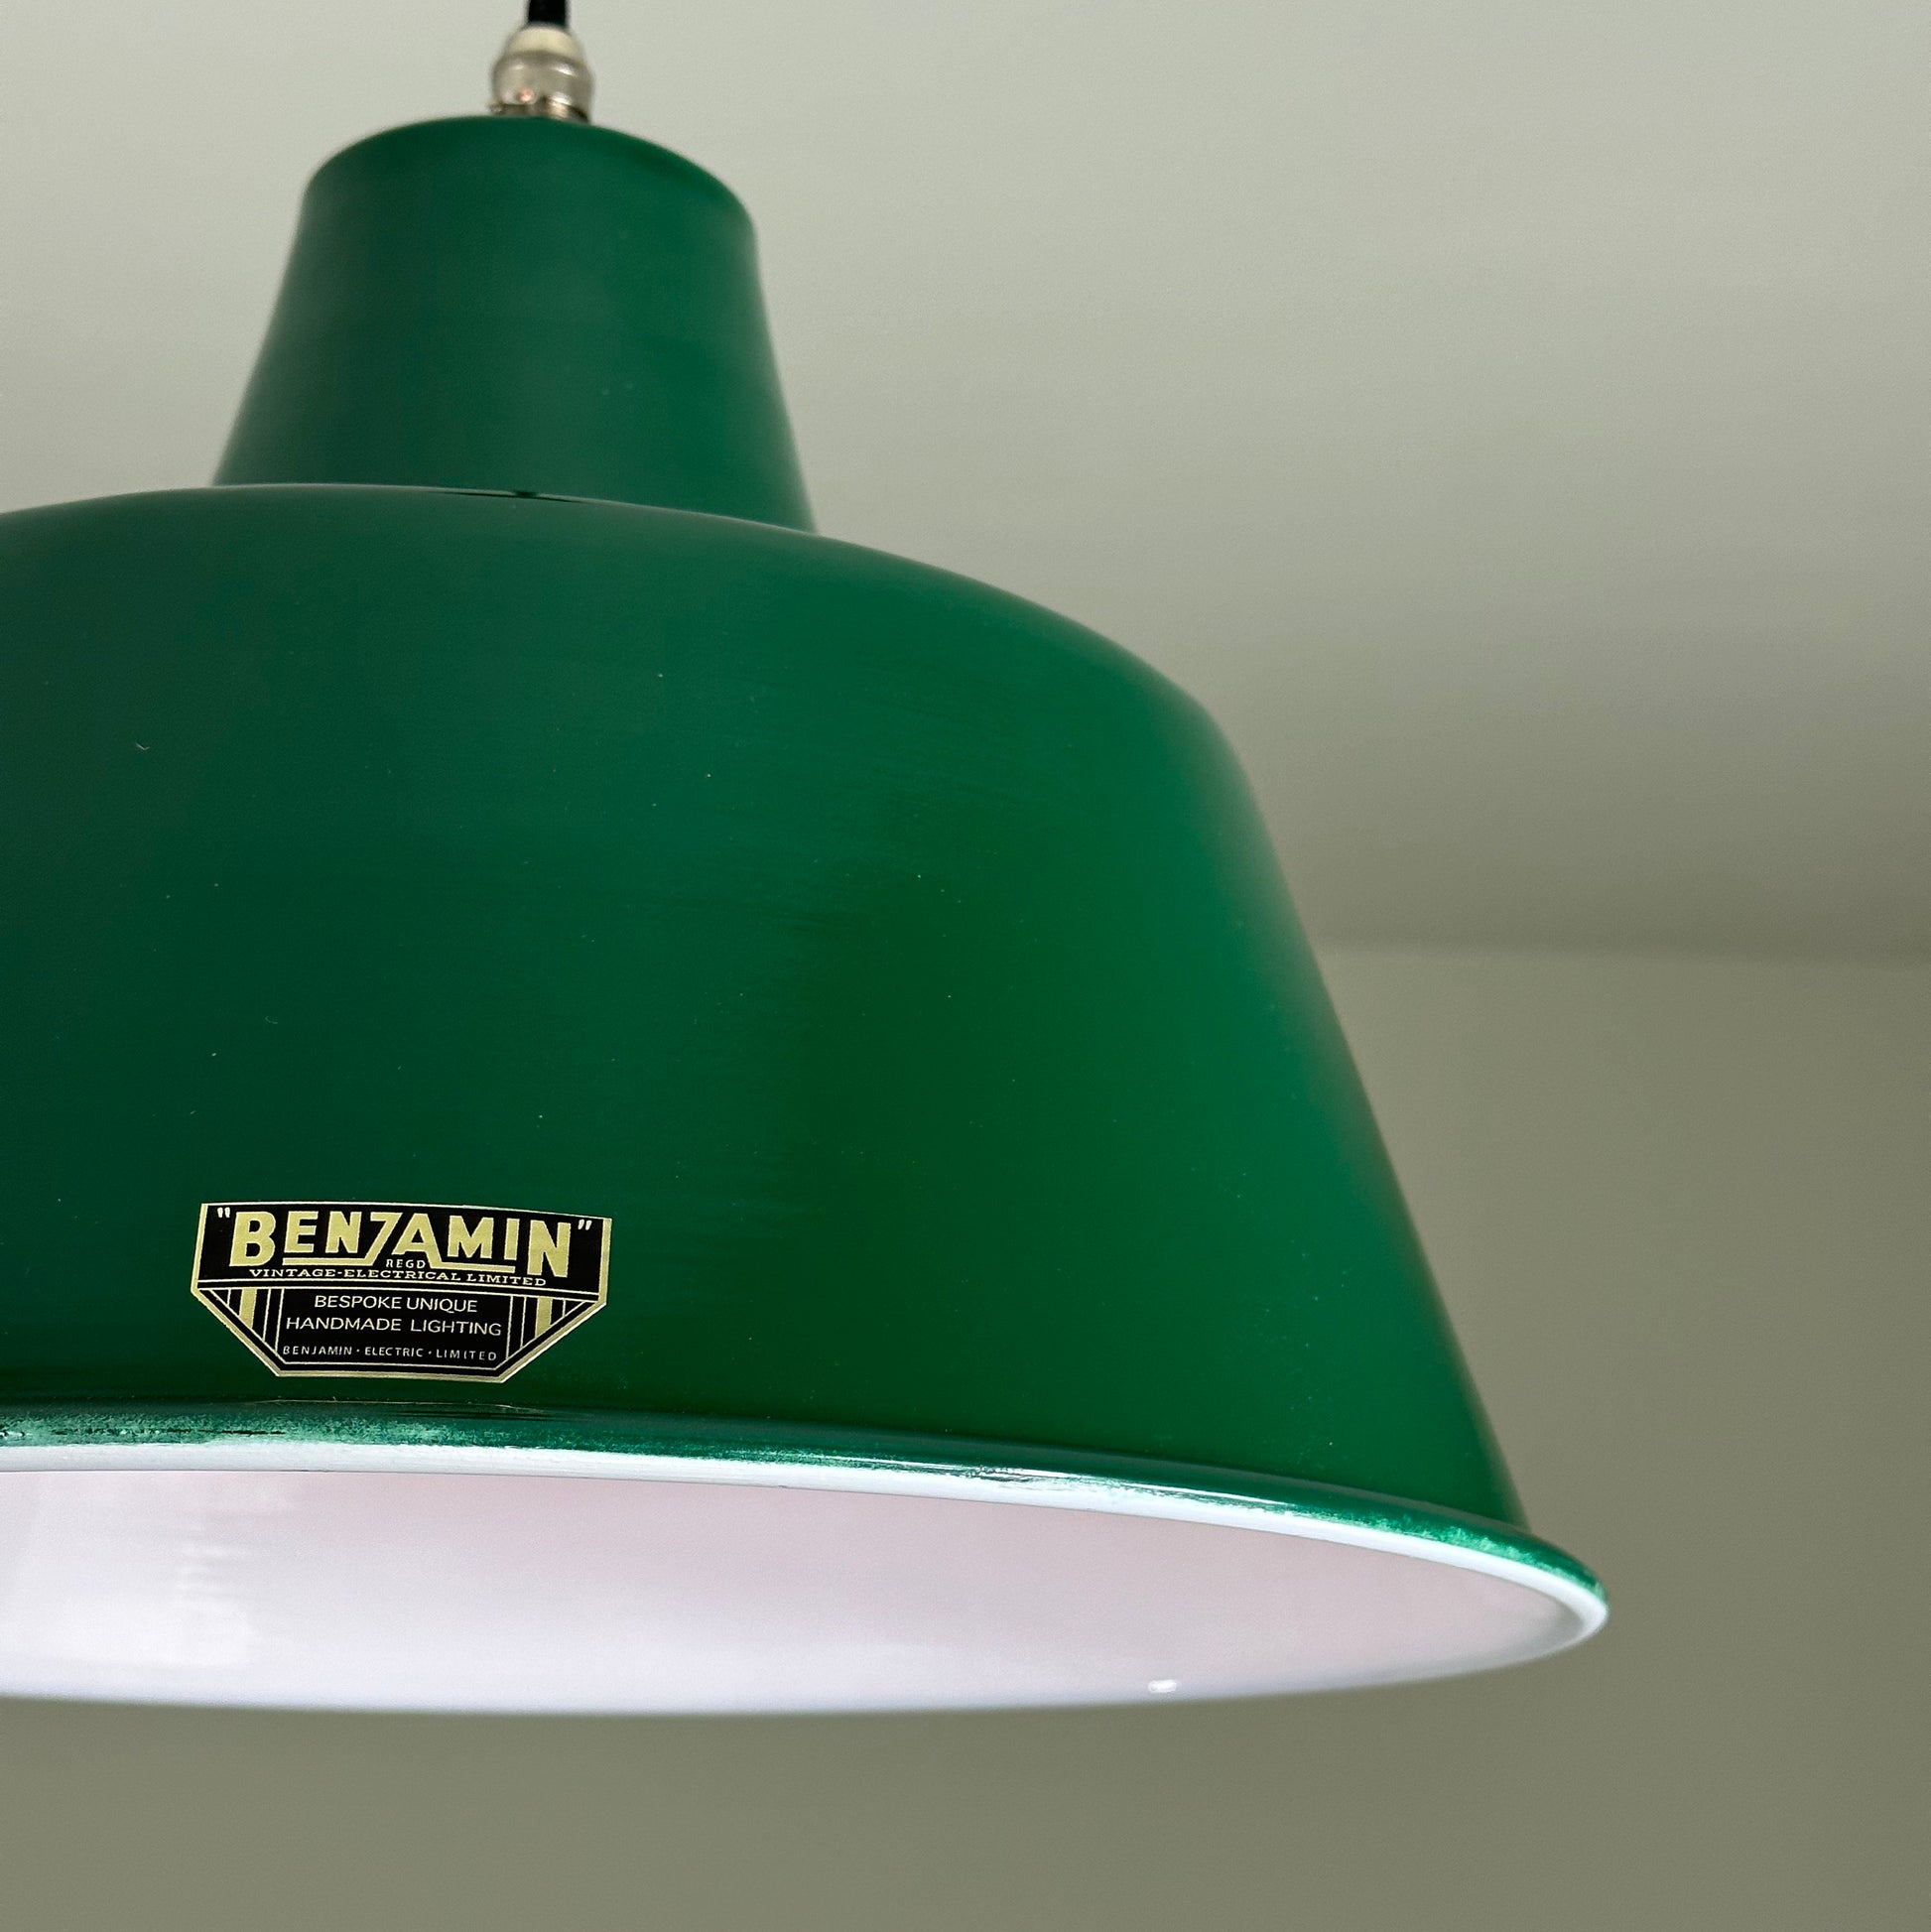 Pentney ~ **Worn** Original Green Industrial factory shade Dome light ceiling | 13.5 Inch | kitchen table vintage lamps pendant wire set